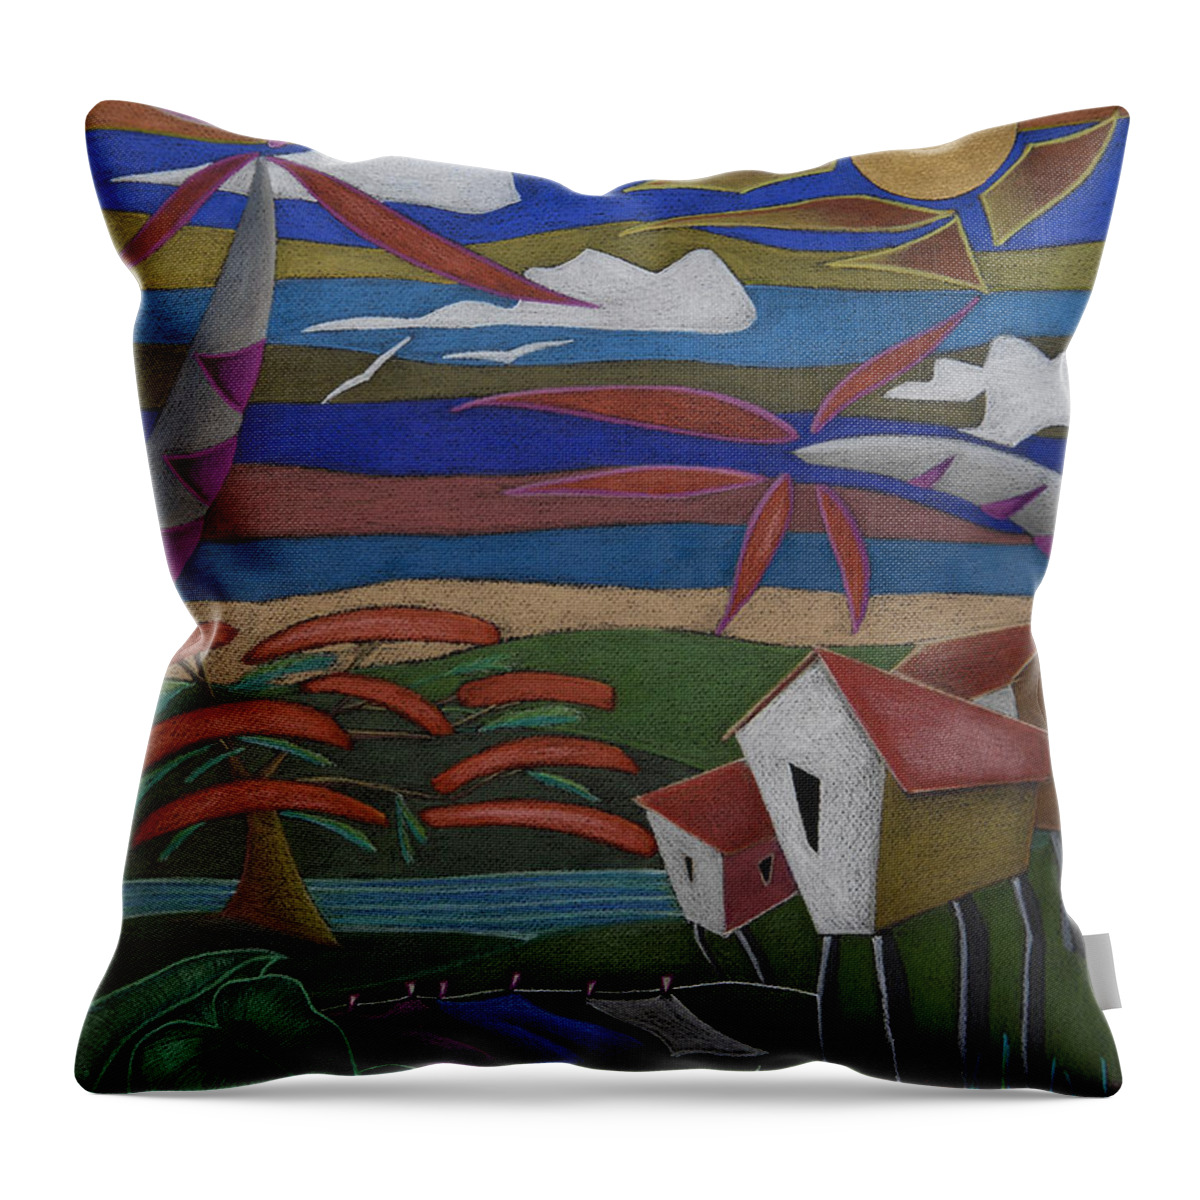 Whimsical Throw Pillow featuring the painting Tiempos y Remembranzas by Oscar Ortiz